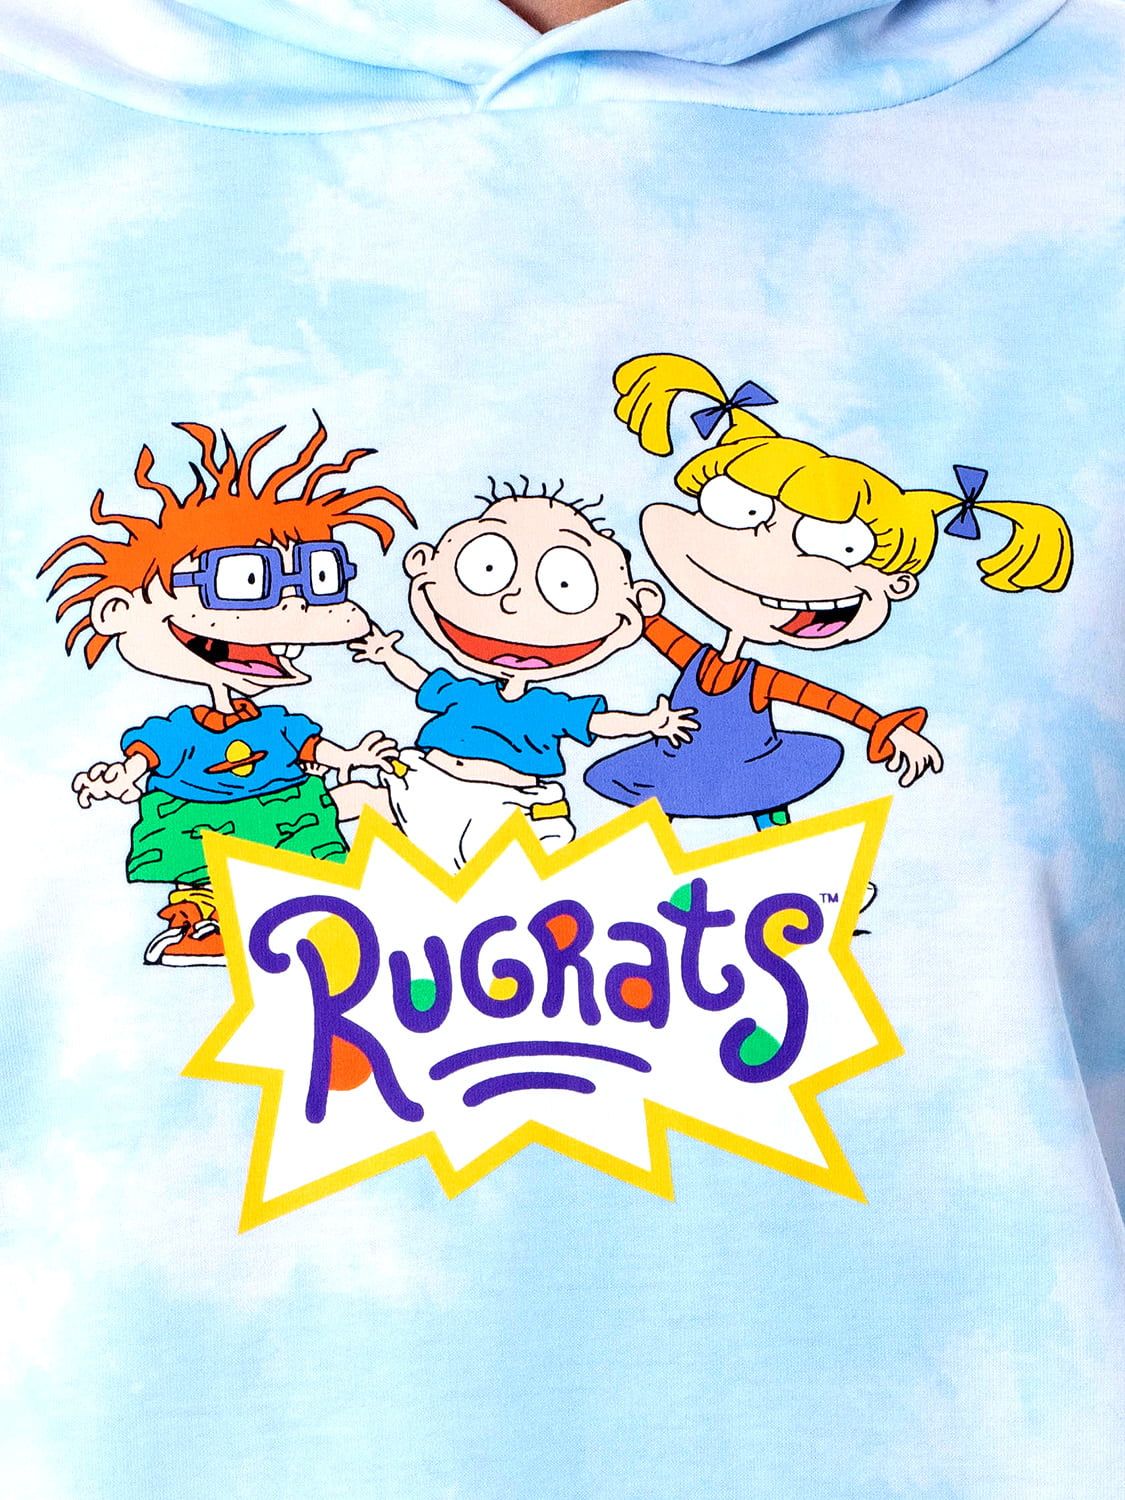 Close up of the Rugrats logo on the front of the hoodie - Rugrats